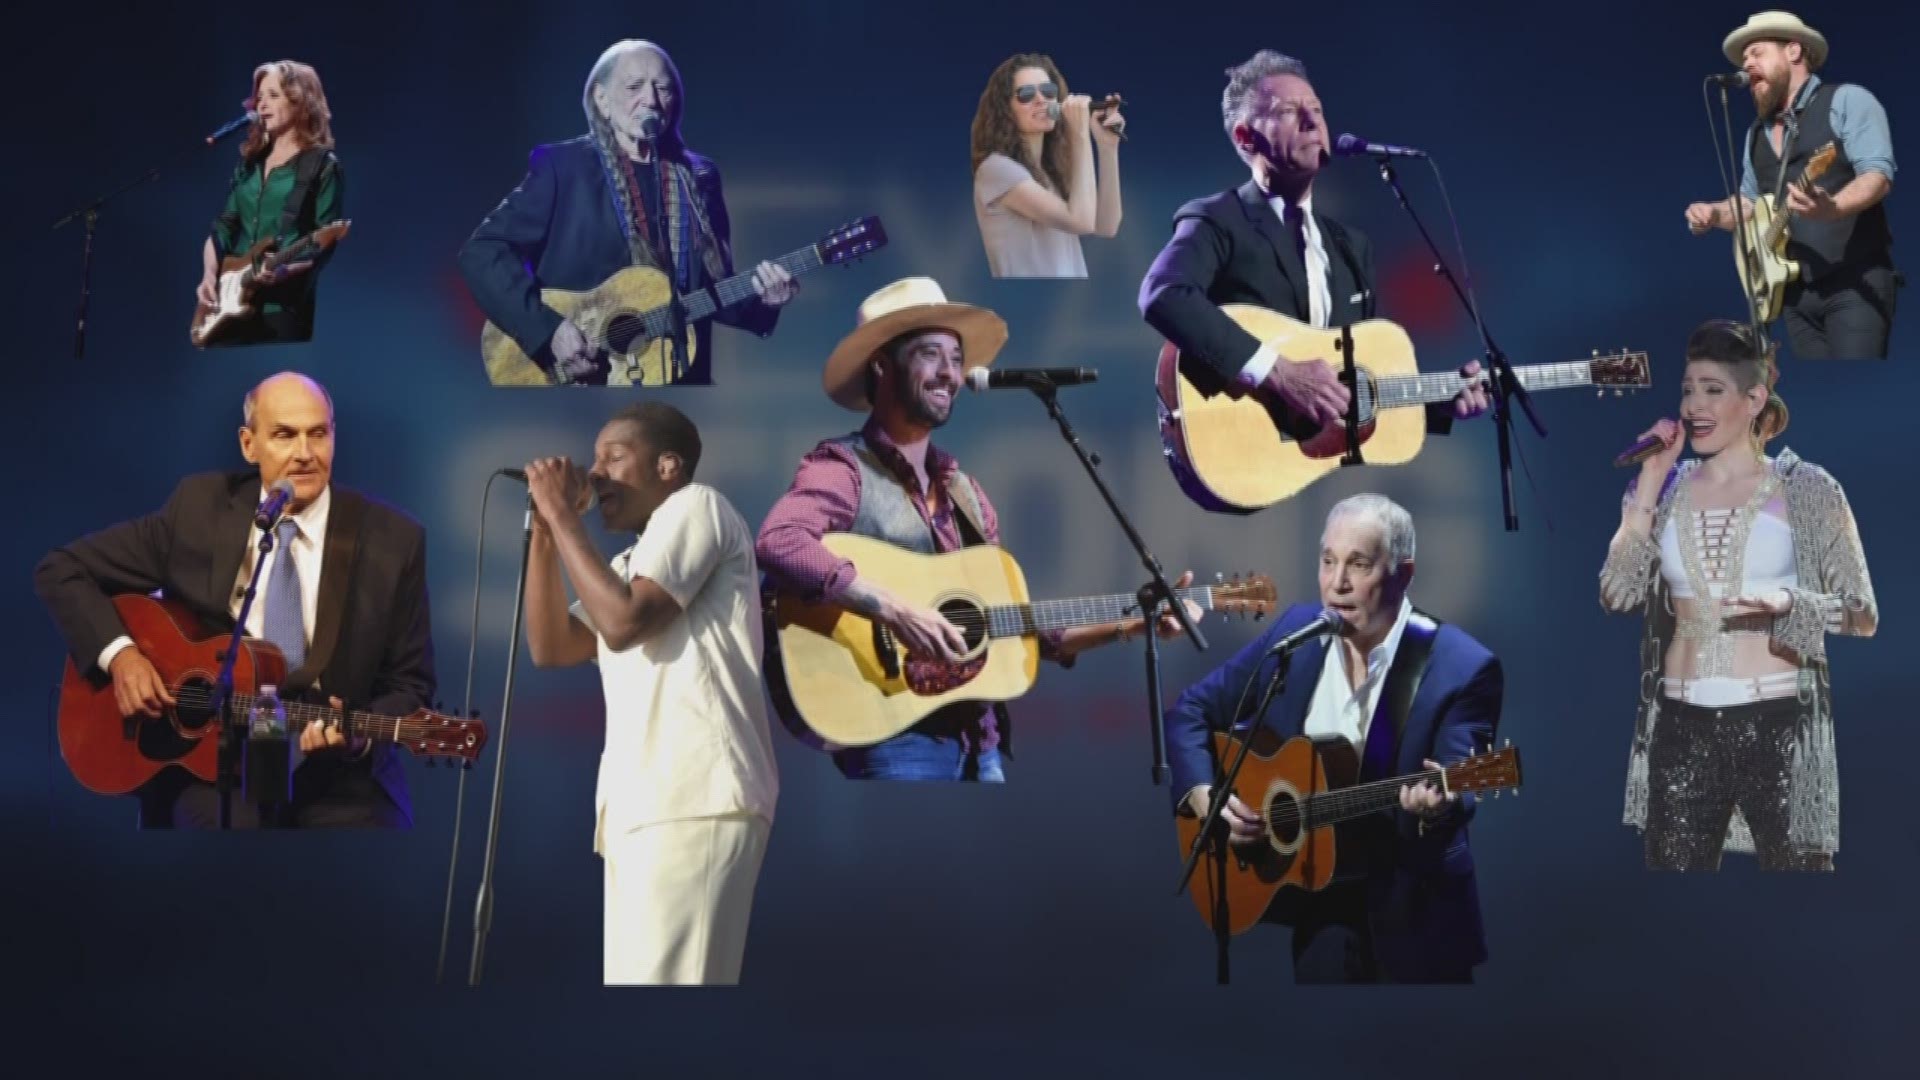 The "Harvey Can't Mess With Texas: A Benefit Concert for Hurricane Harvey Relief" will take place on Friday, Sept. 22 at the Frank Erwin Center.